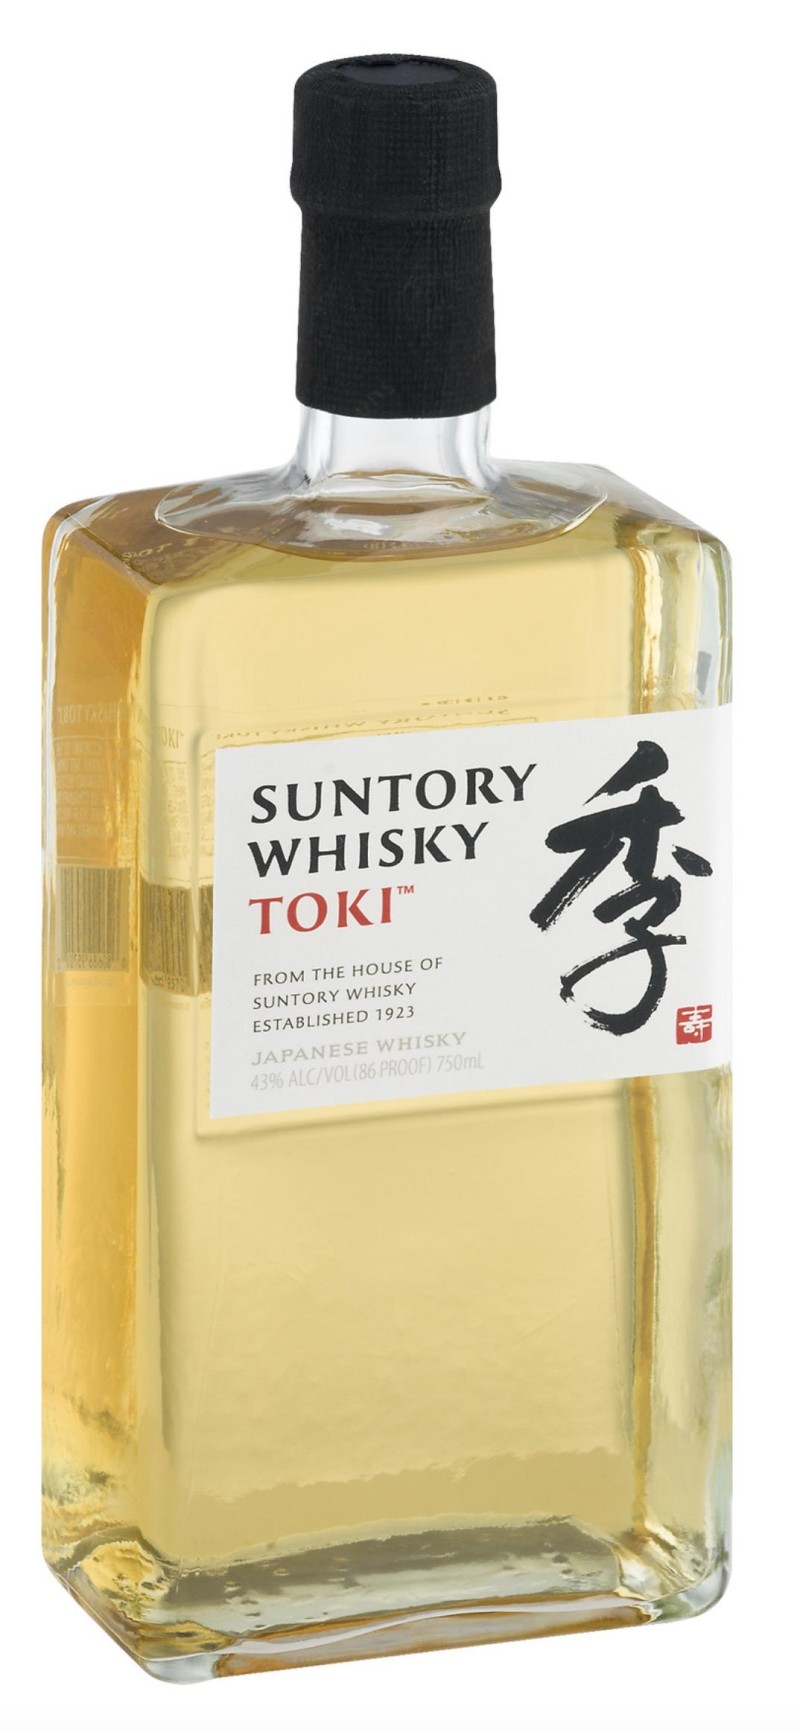 Whisky-TOKI Millésimes des - SUNTORY - Japanese wines Rare and Clos vintages - 43% great